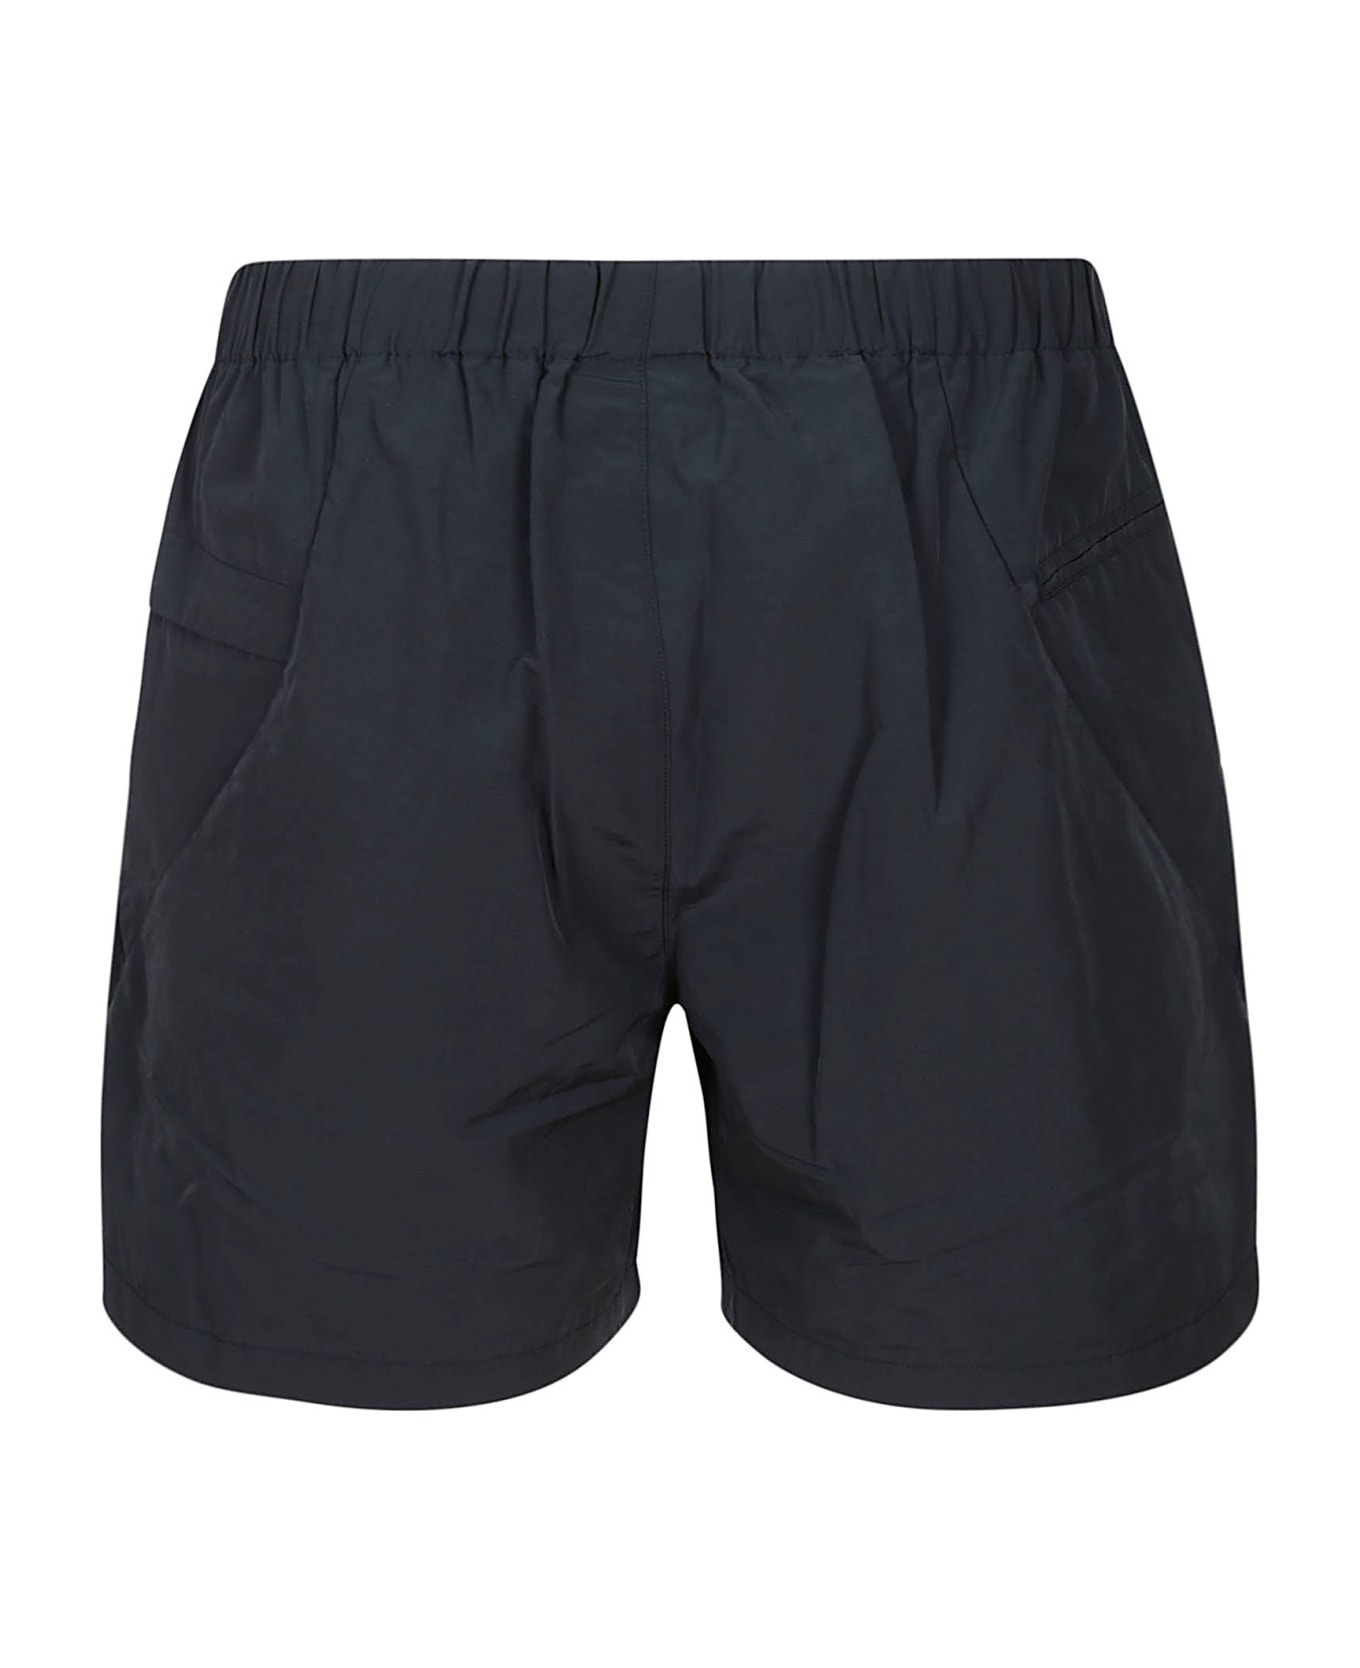 Goldwin Easy Wide Shorts - Sx Space Navy ショートパンツ